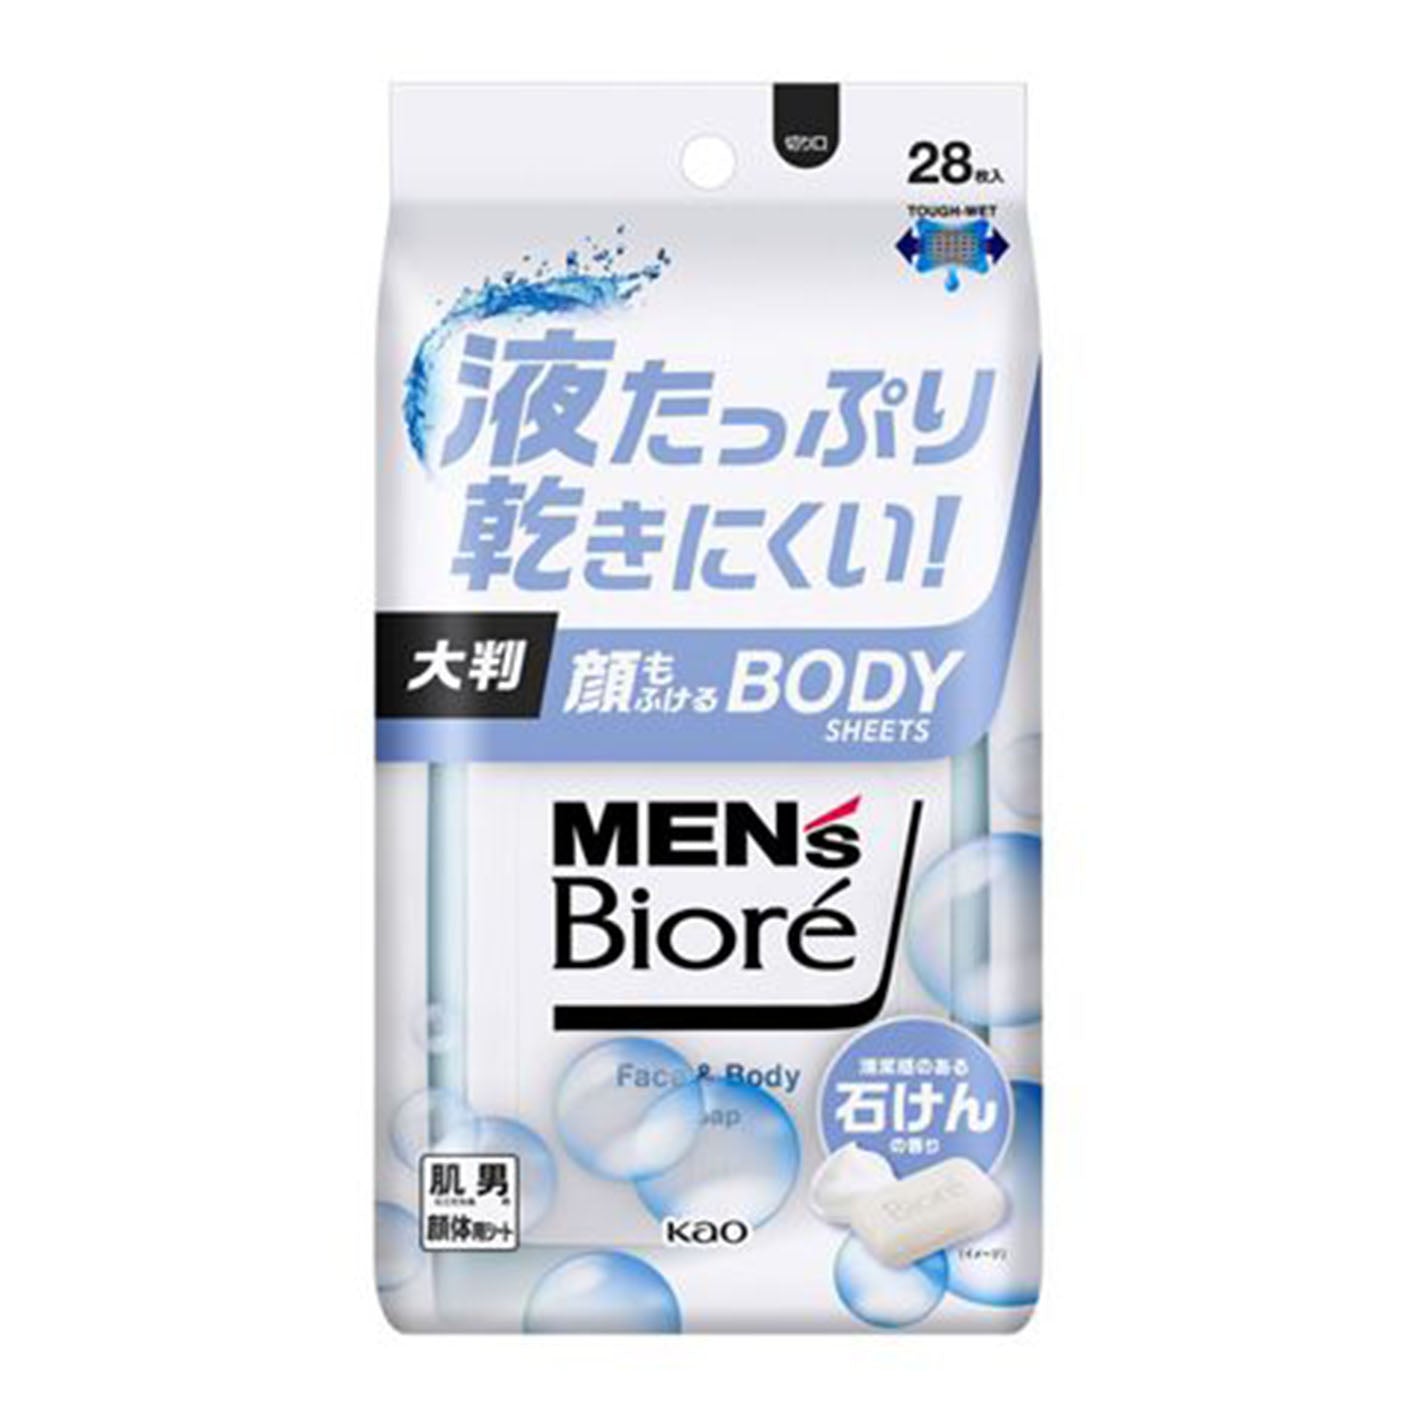 Men's Biore Body Sheet That Indulges Your Face - Clean Soap Scent - 28 Sheets - Harajuku Culture Japan - Japanease Products Store Beauty and Stationery